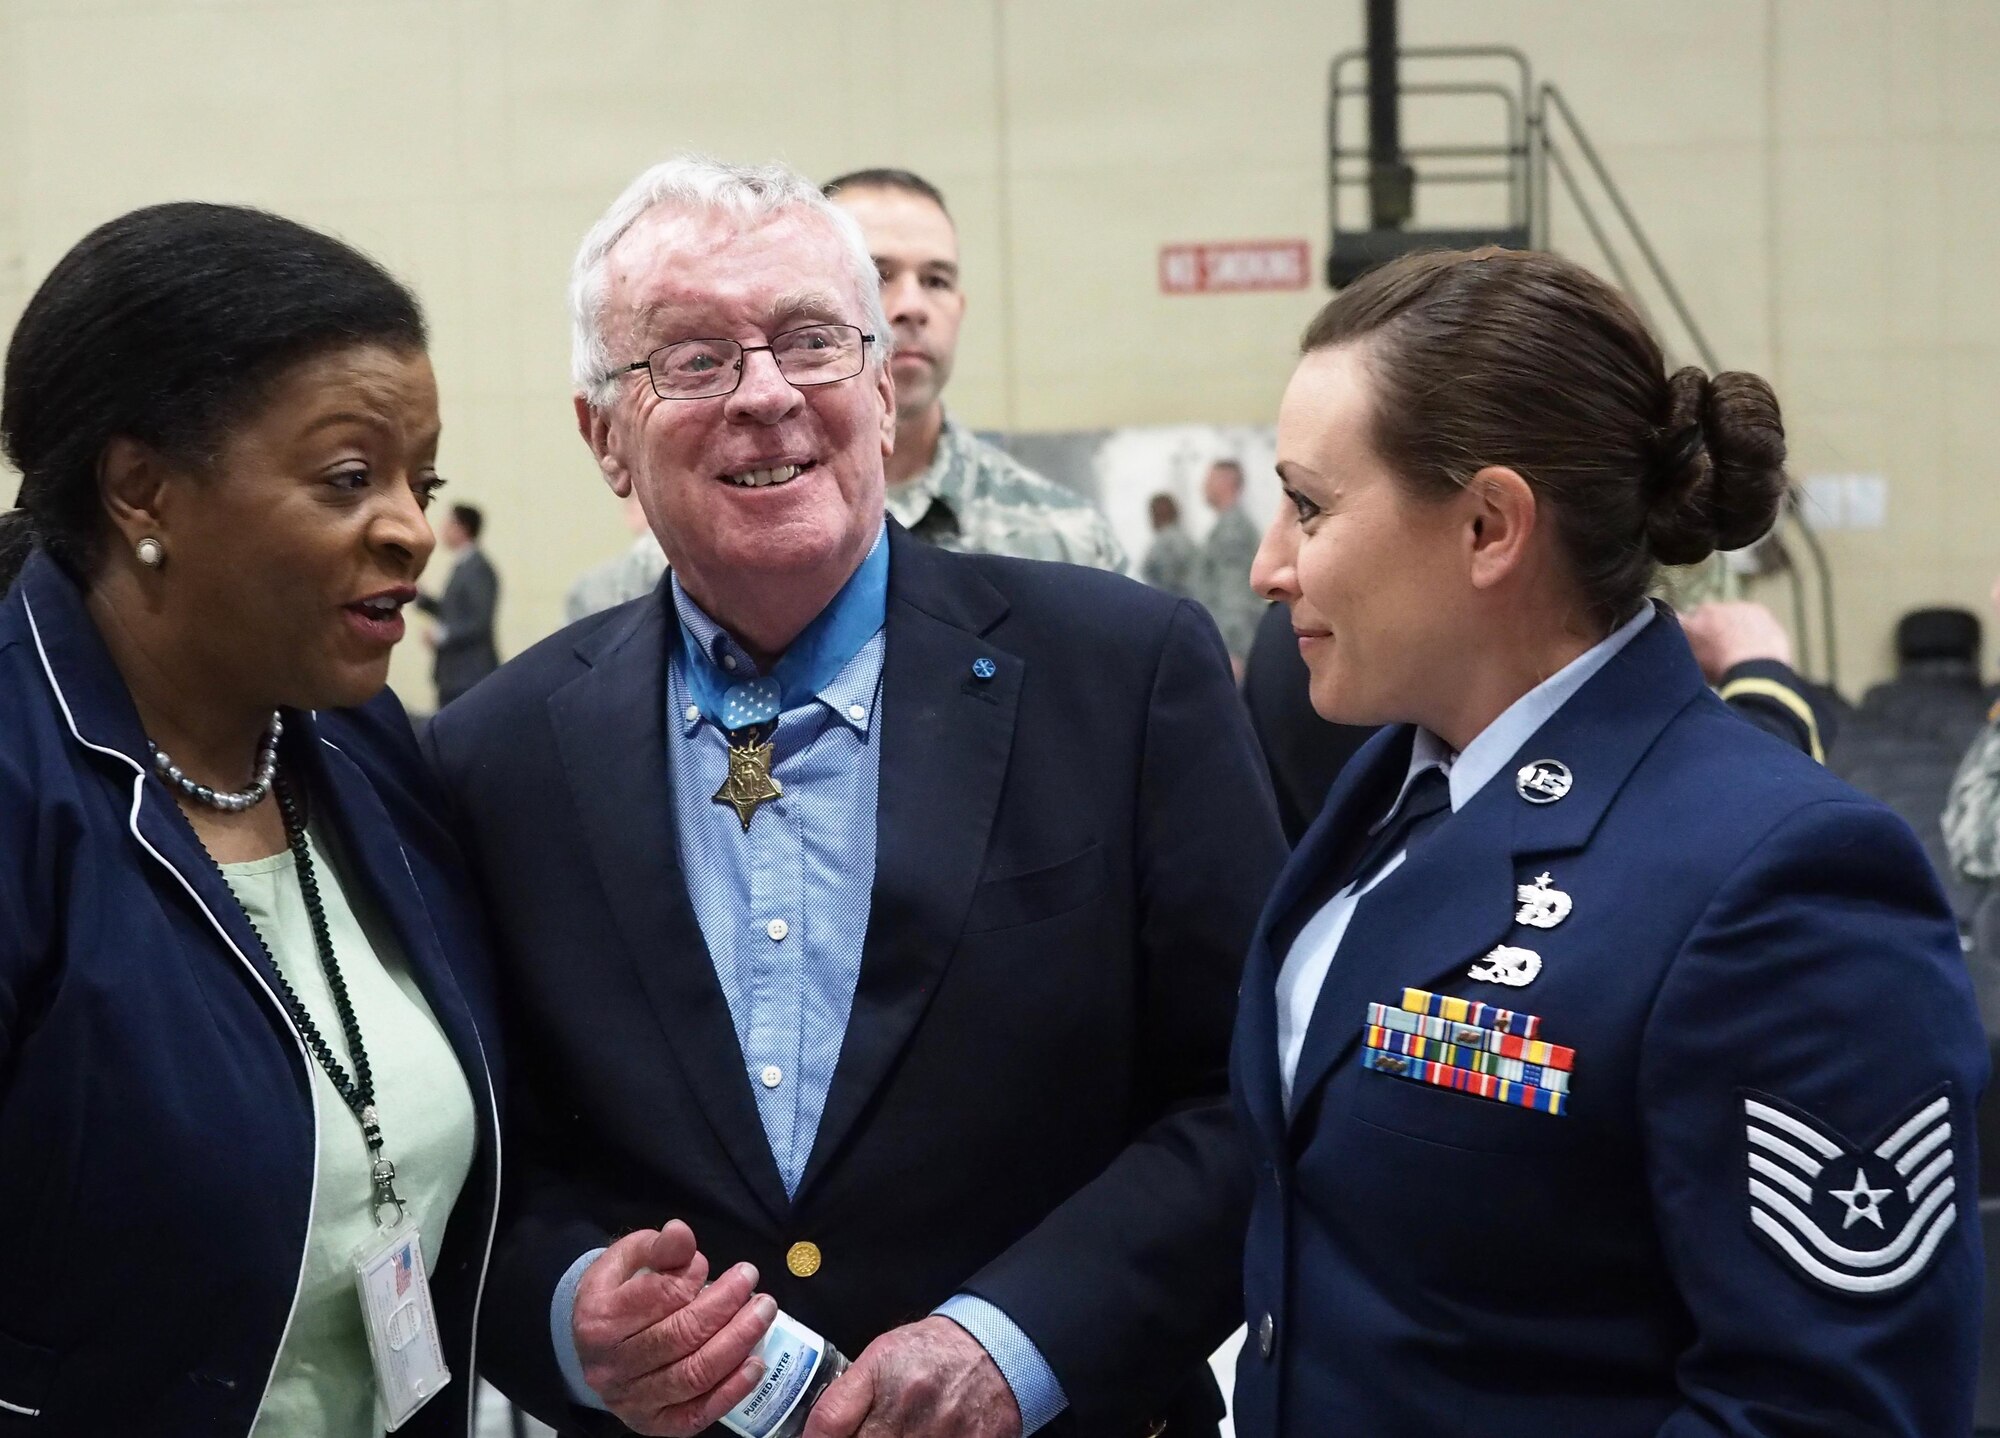 Tech. Sgt. Erica Hokkanen, 934th Development and Training Flight, talks with Medal of Honor recipient Thomas Kelley and Armed Forces Services Center Director Debra Cain. (Air Force Photo/Paul Zadach)